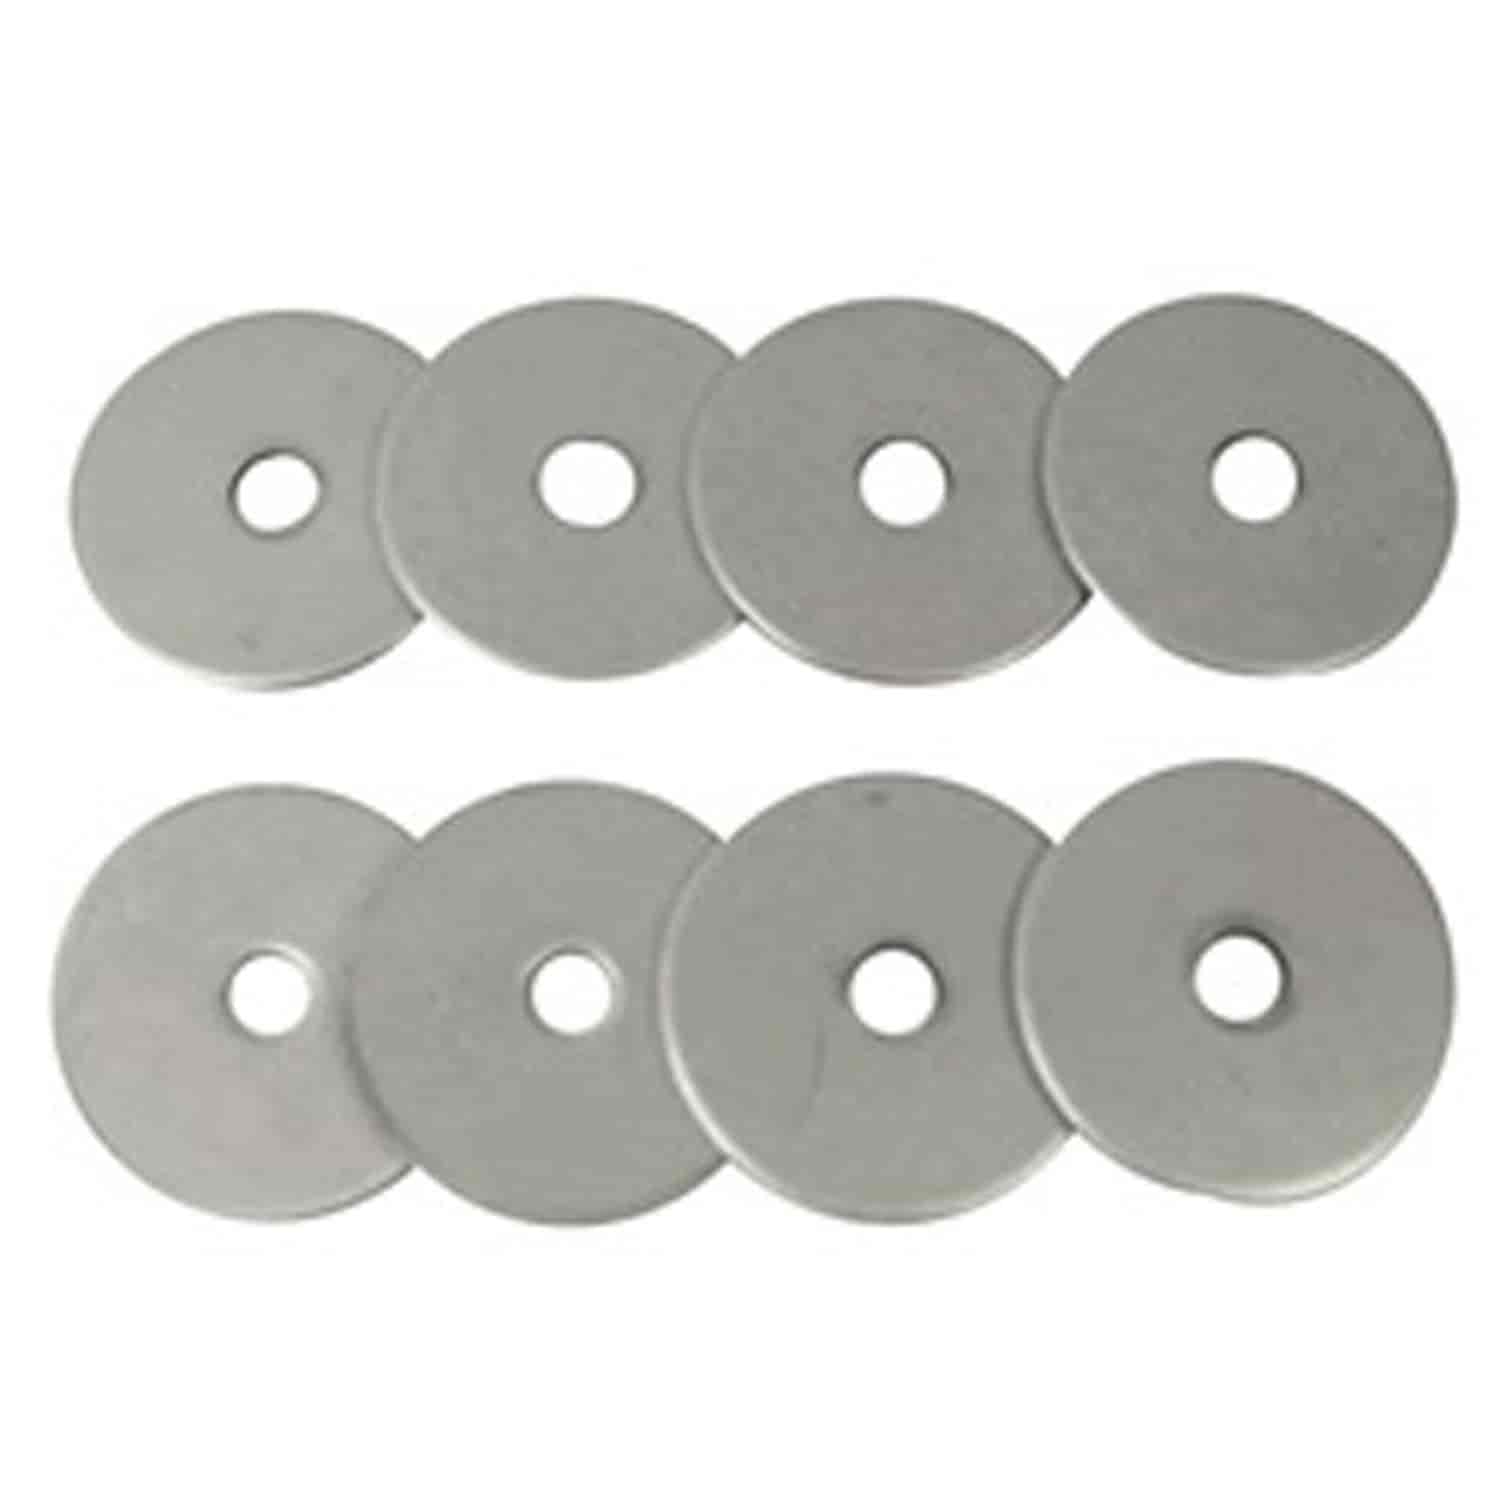 This 8 piece body mount washer kit from Rugged Ridge fits 72-75 Jeep CJ5 and CJ6.